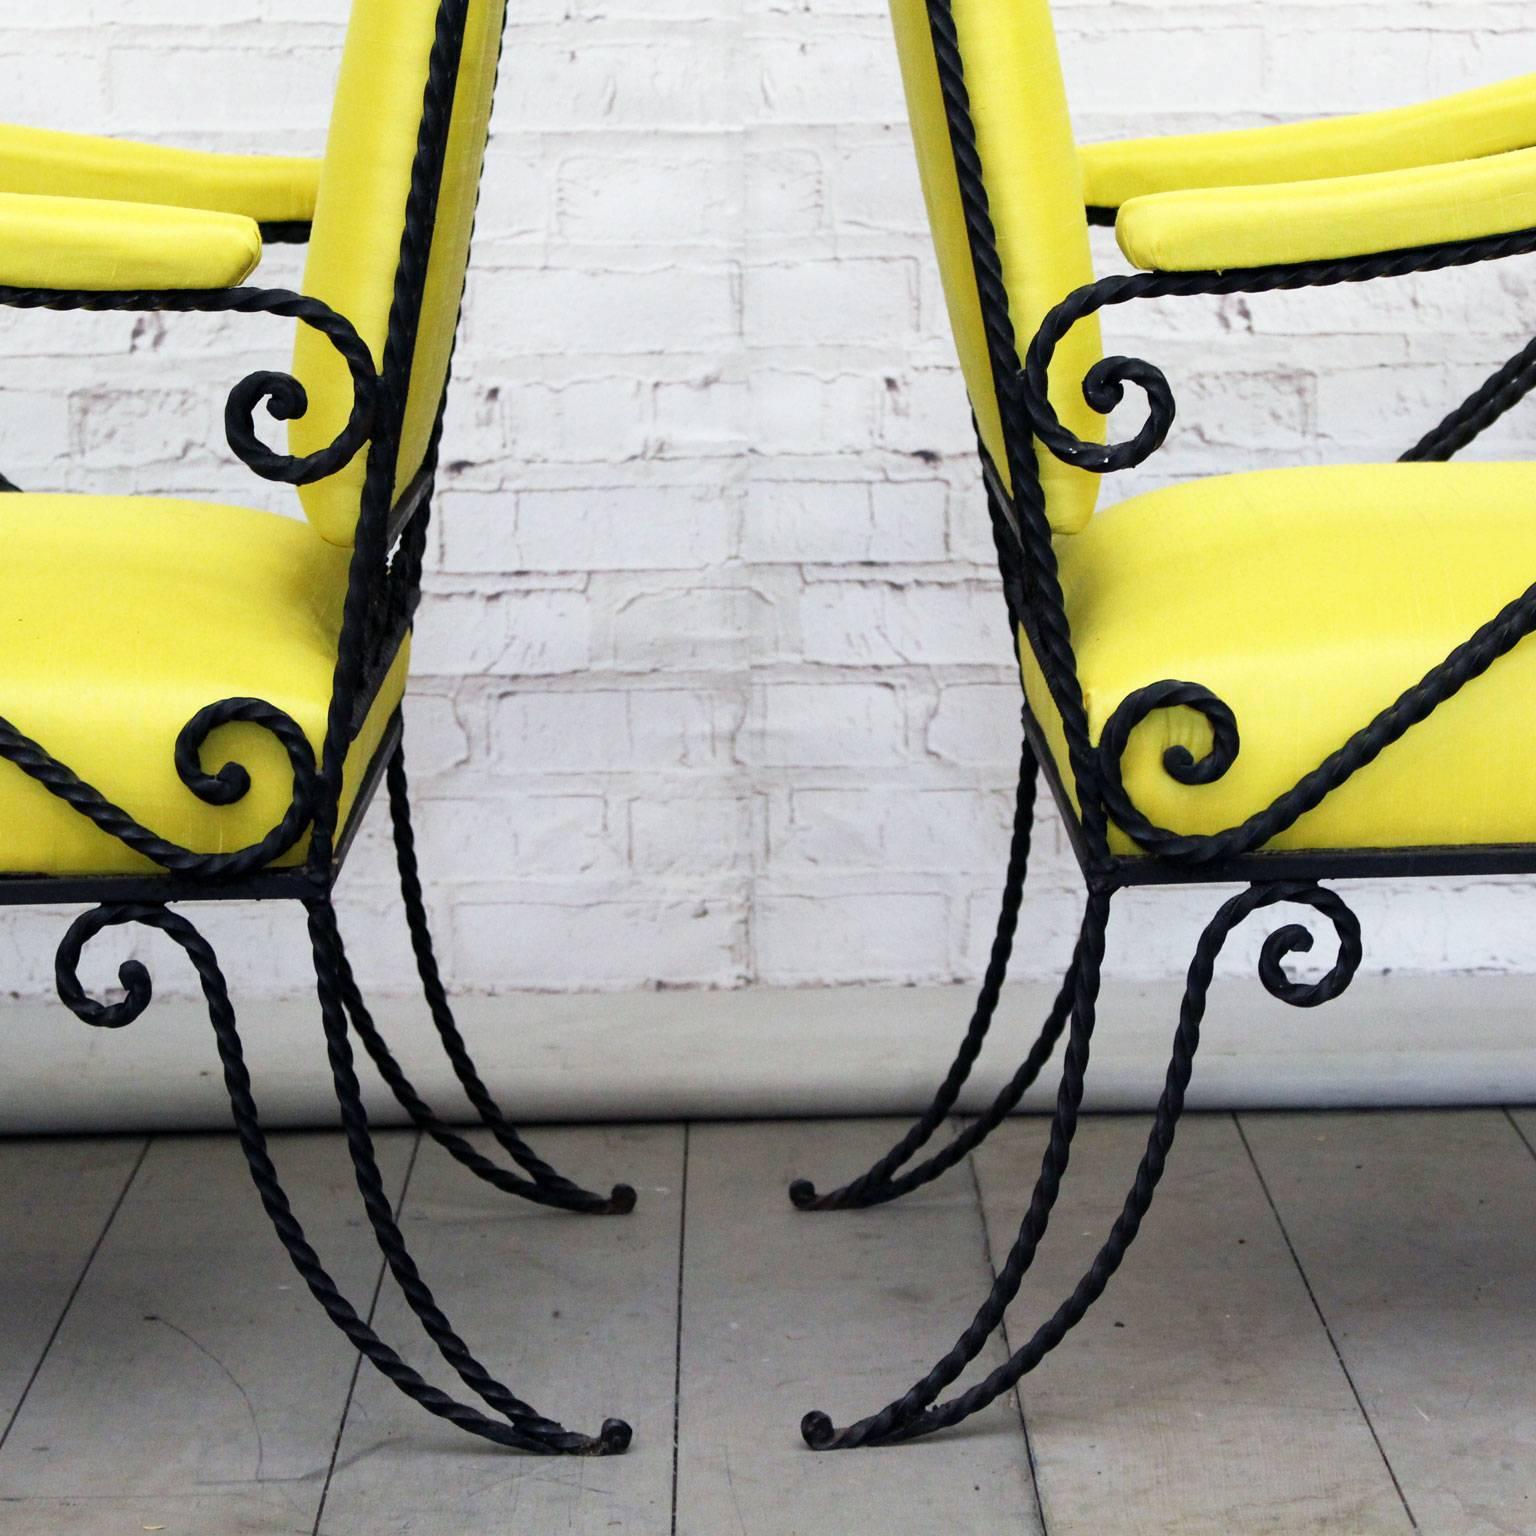 This very fine pair of ornate French armchairs has been reupholstered in yellow silk. They would work just as well inside or out. We love the three dimensional aspect of the twisted black metal work.
 